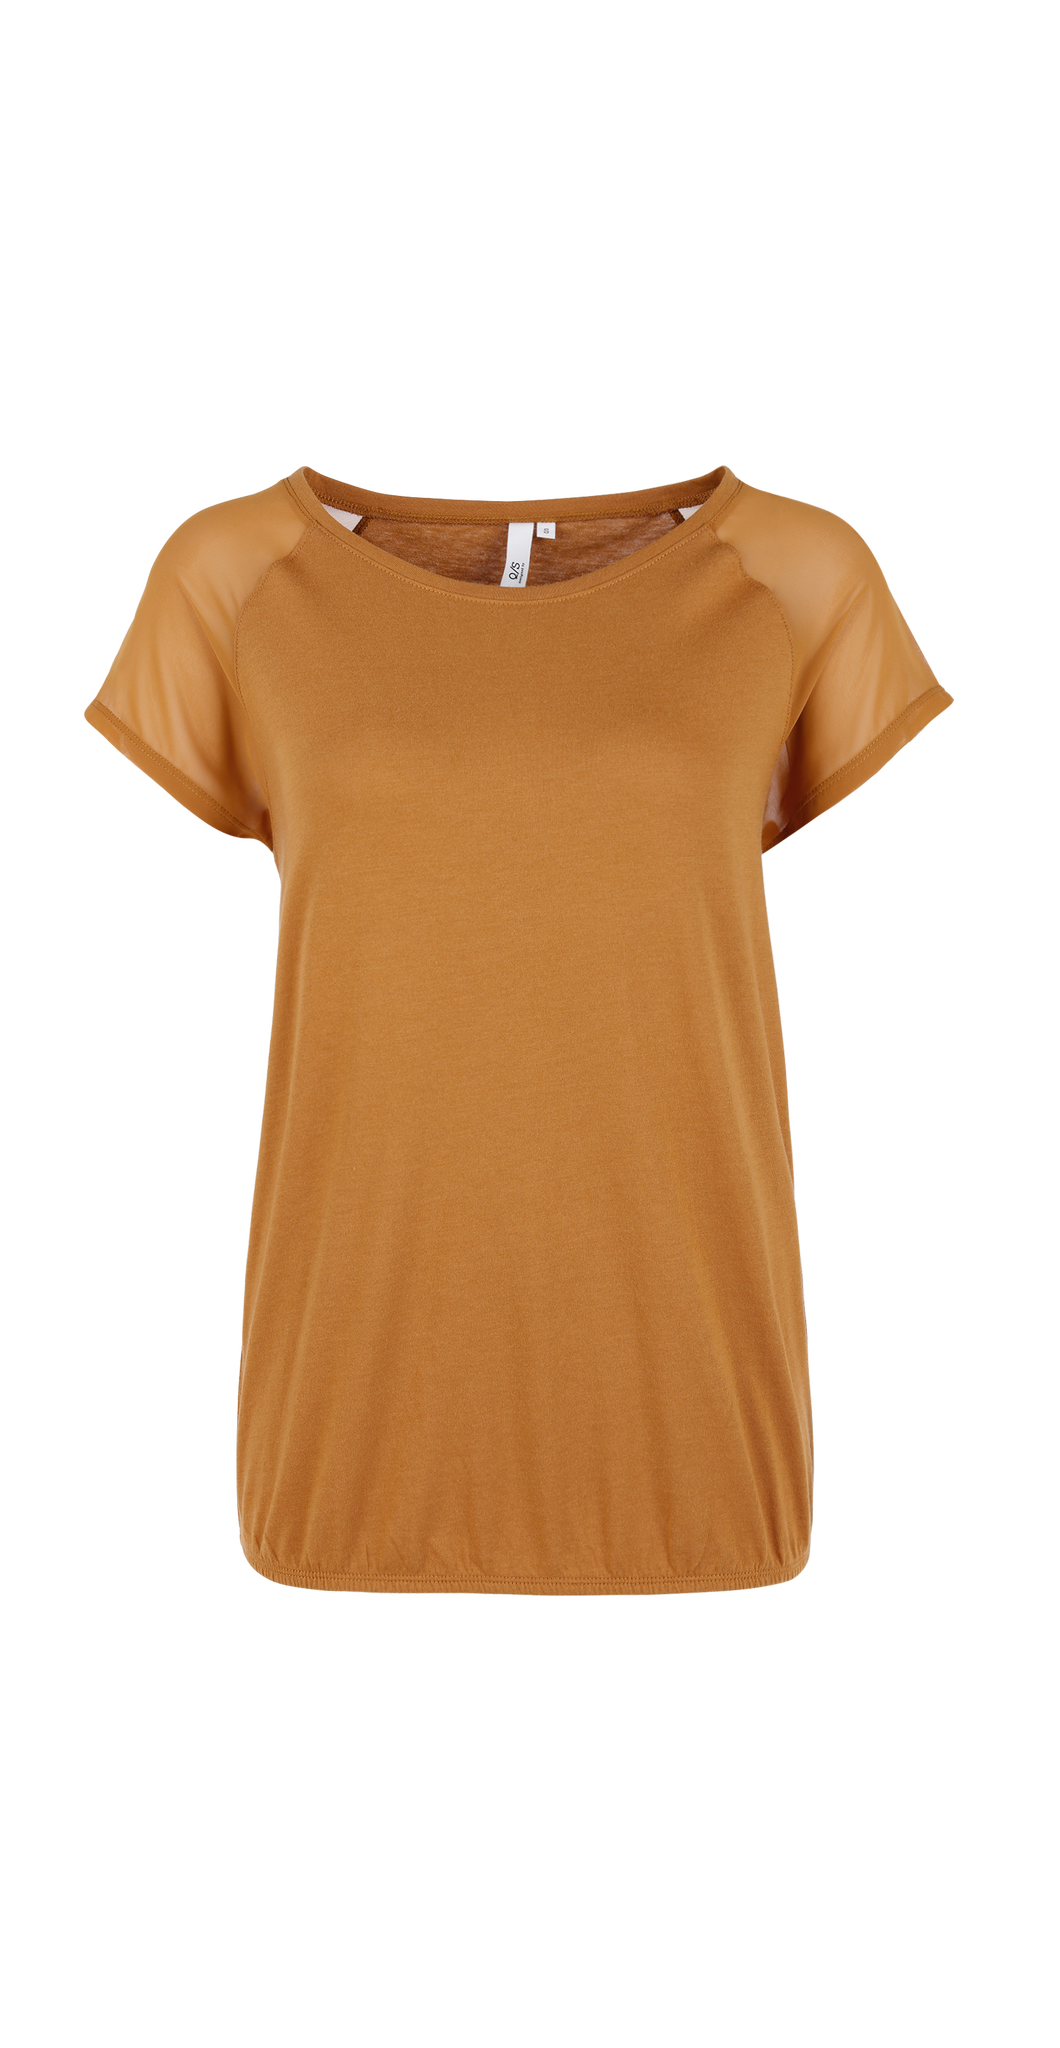 Buy O-shaped top with blouse details | s.Oliver shop